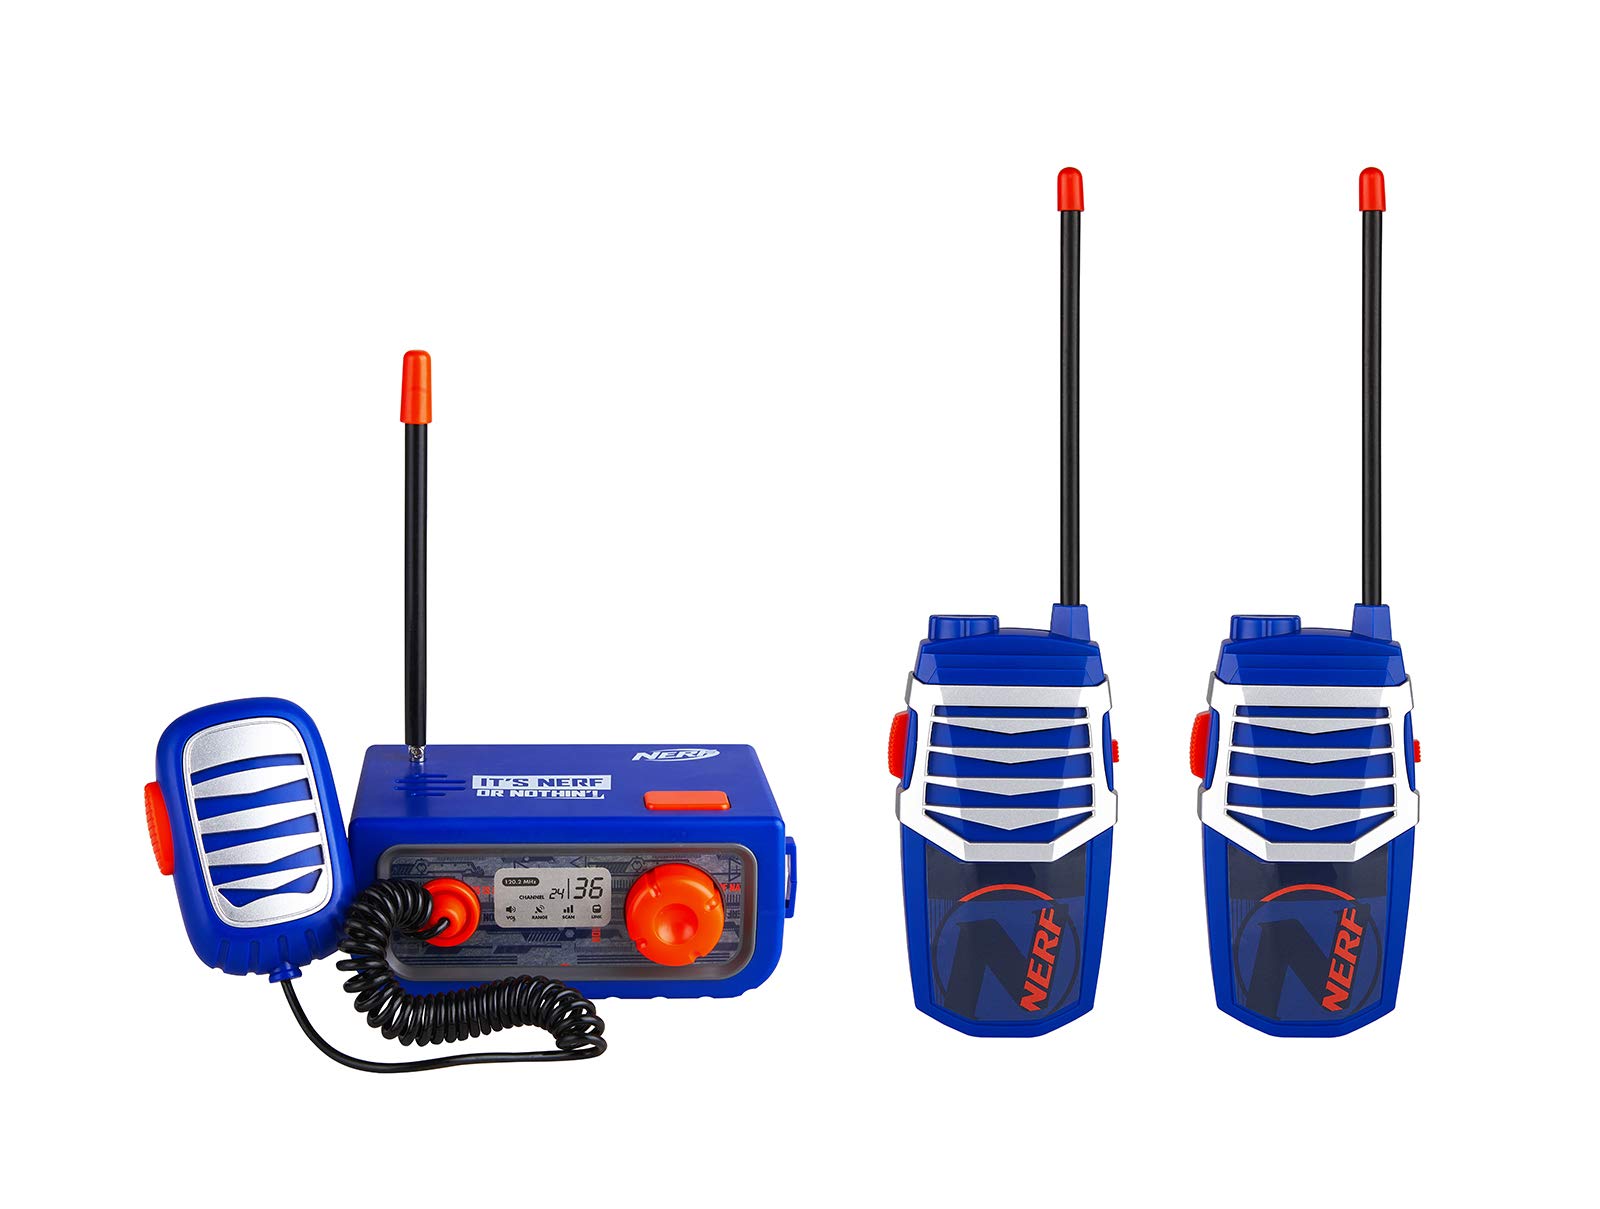 Walkie Talkies Set, 3 Piece Walkie Talkie Base Station Kit for Kids and Adults, Long Rang Three Way Radio with Volume Control, Rugged Outside Toys for Children Boys and Girls